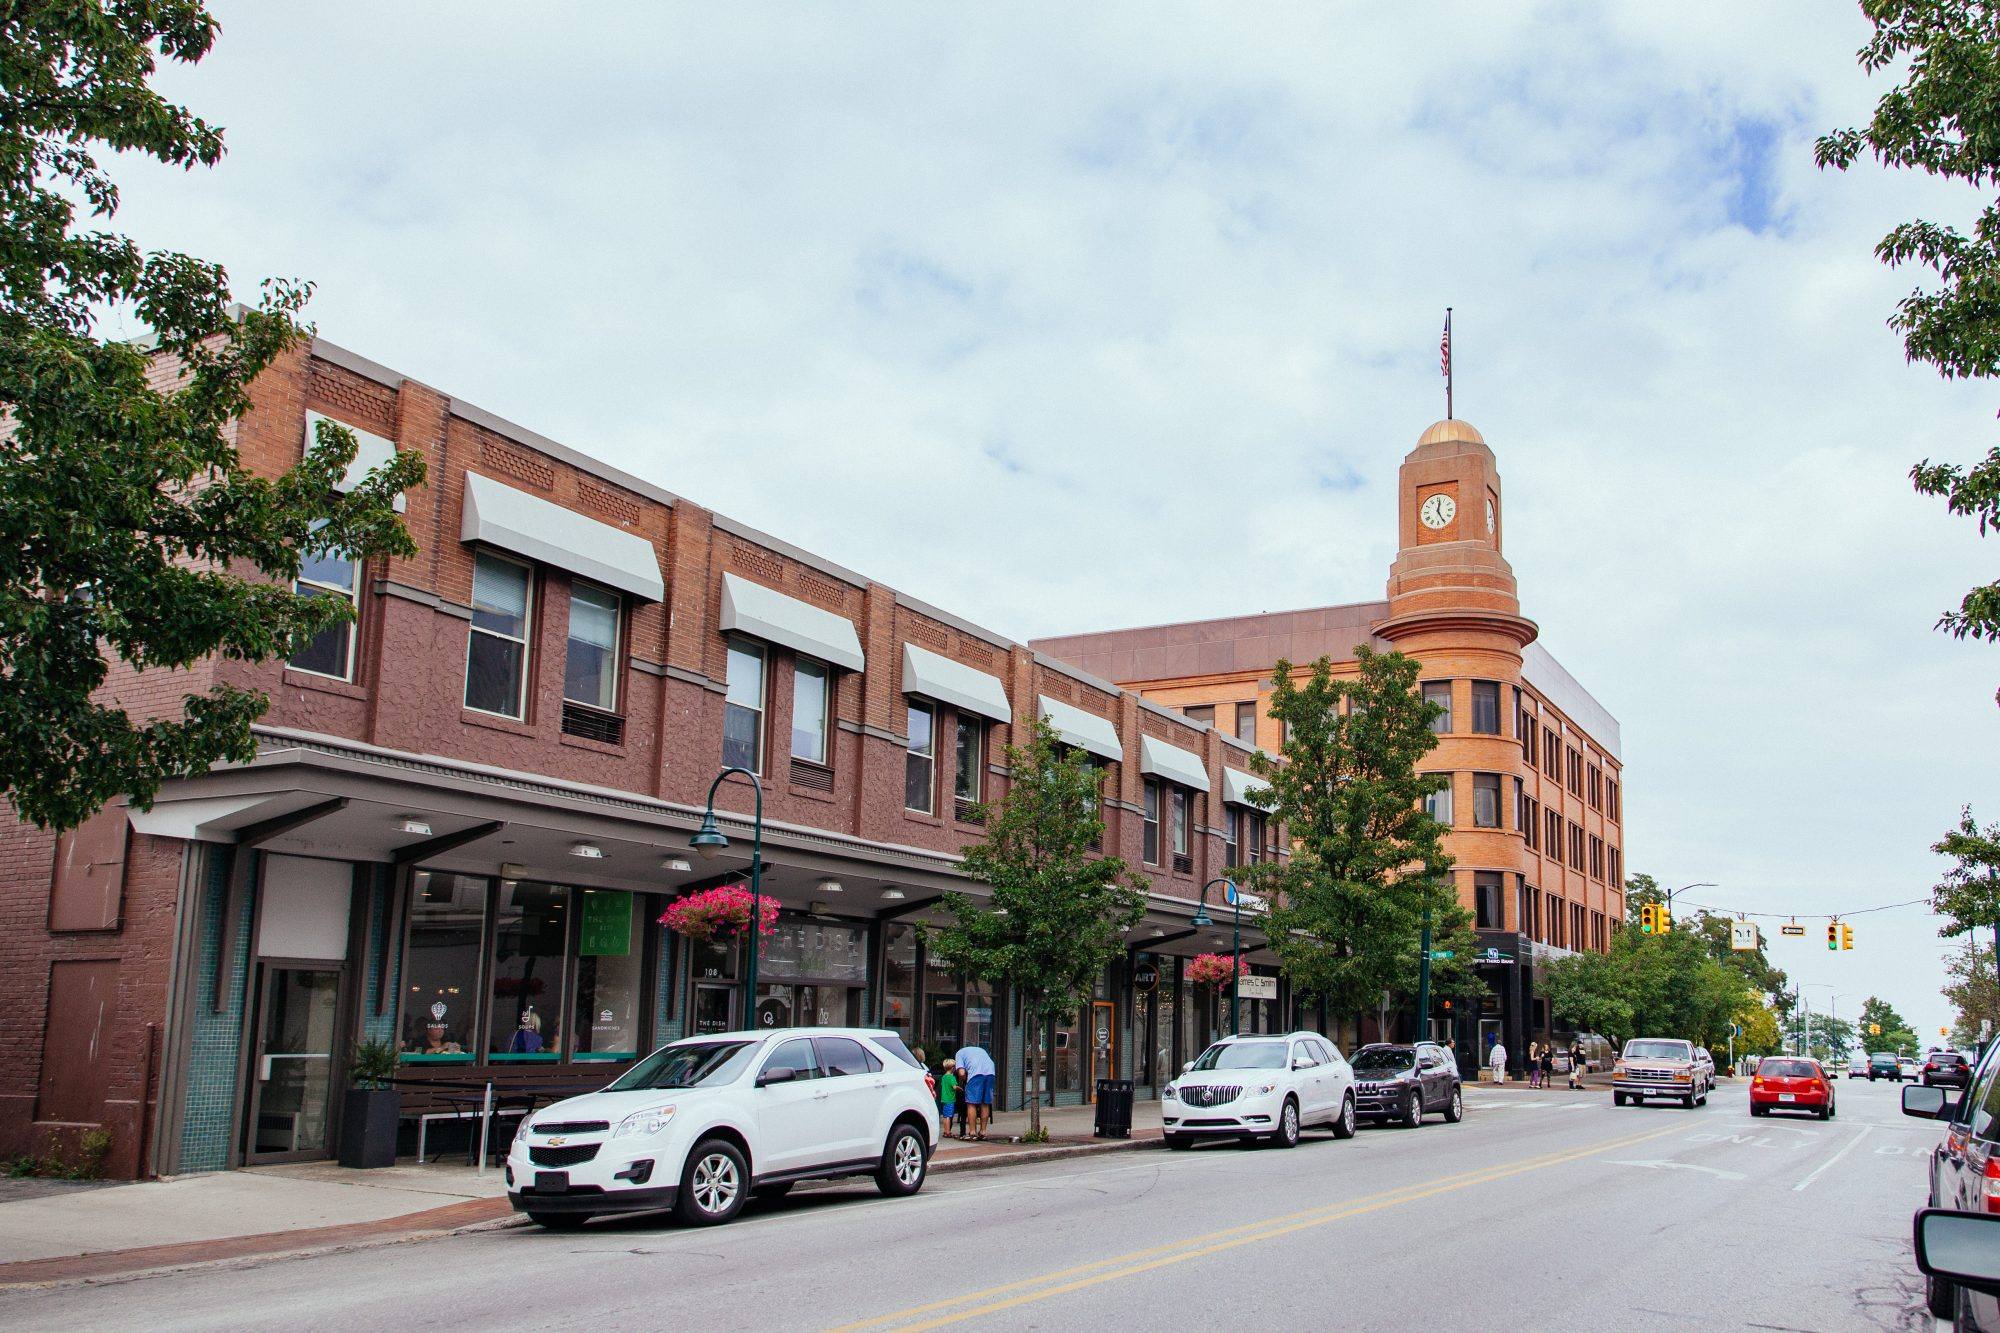 Downtown Traverse City Michigan with cars driving down the street